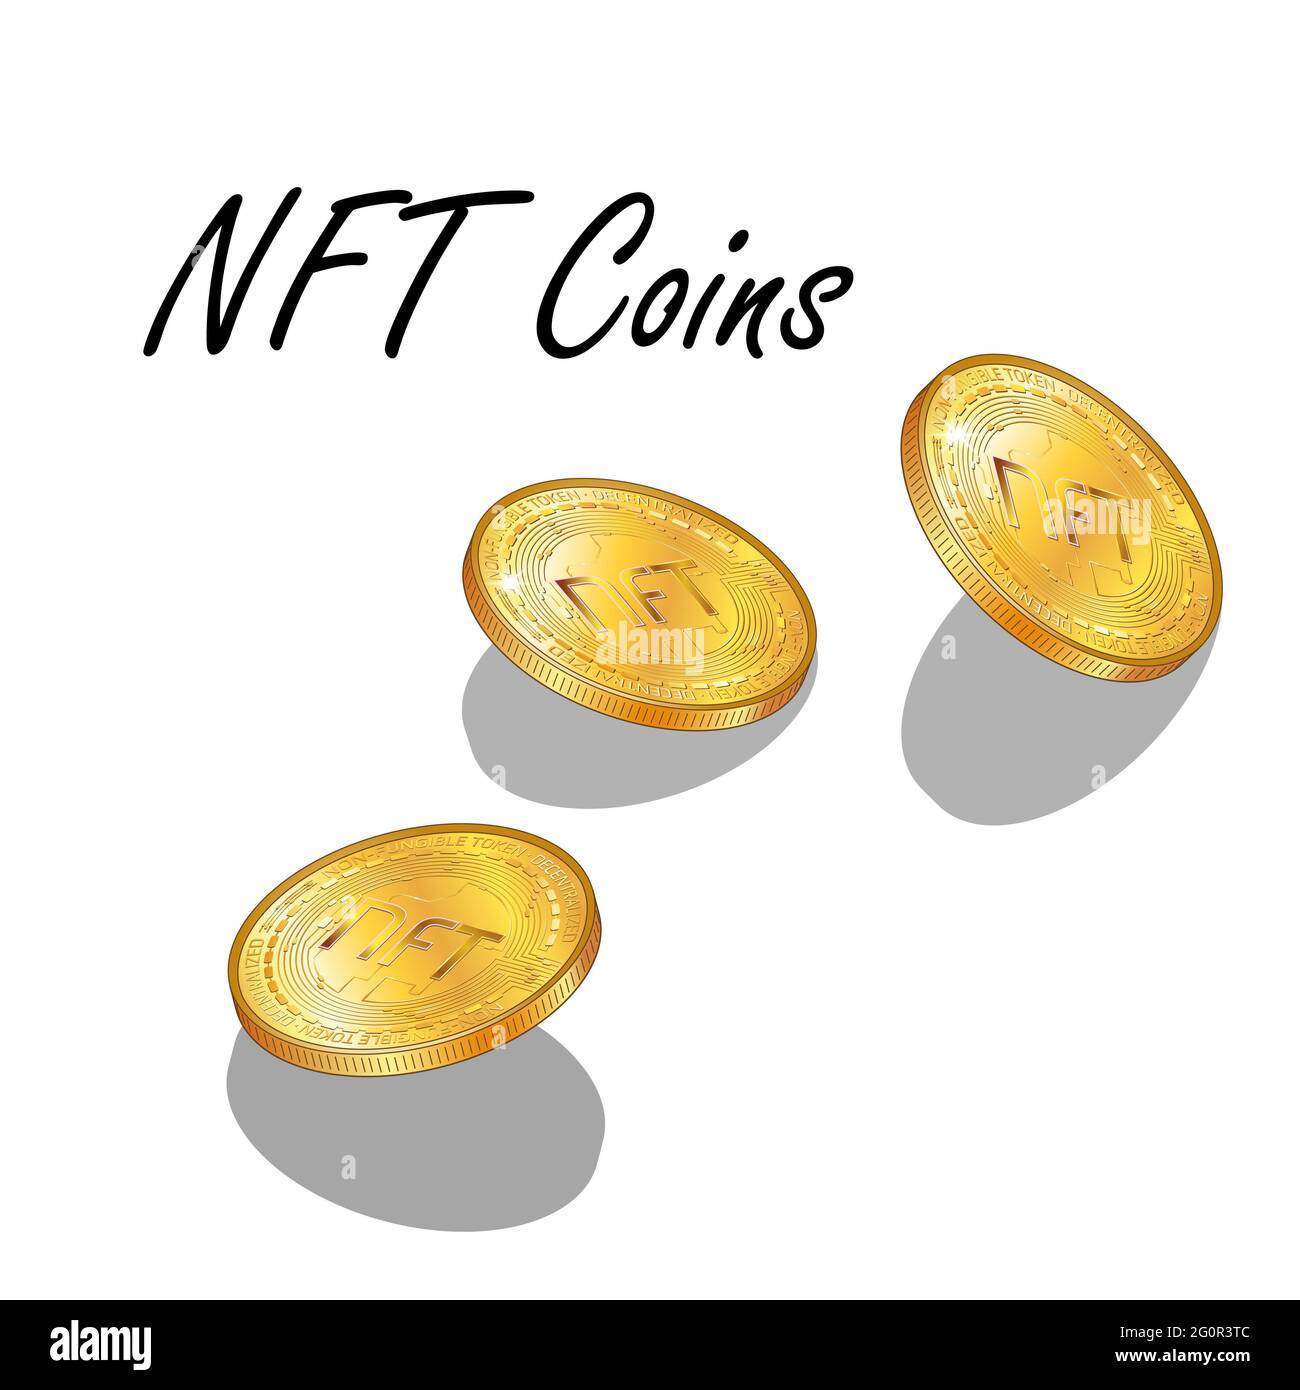 Set of detailed isometric golden coins NFT non fungible tokens isolated on white. Pay for unique collectibles in games or art. Stock Photo